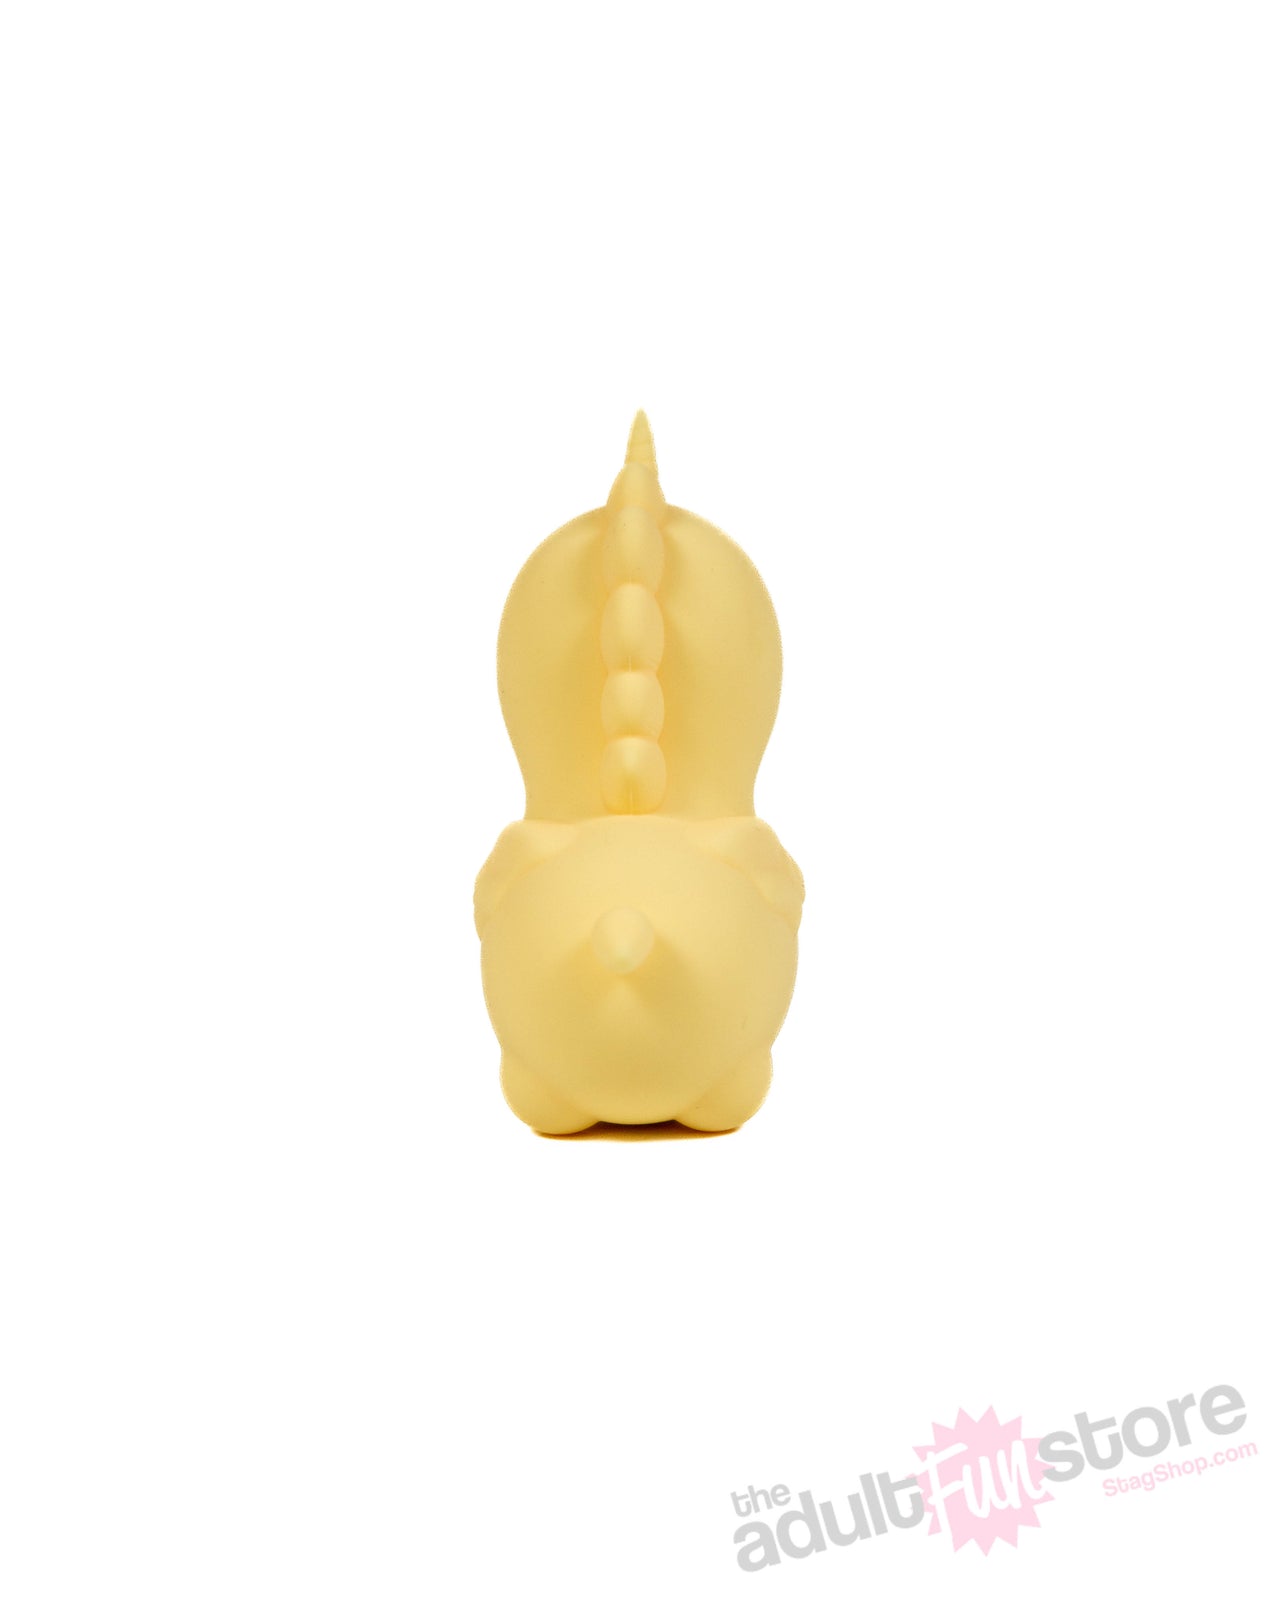 Creative Conceptions - Unihorn Bean Blossom Fluttering Vibrator - Yellow - Stag Shop